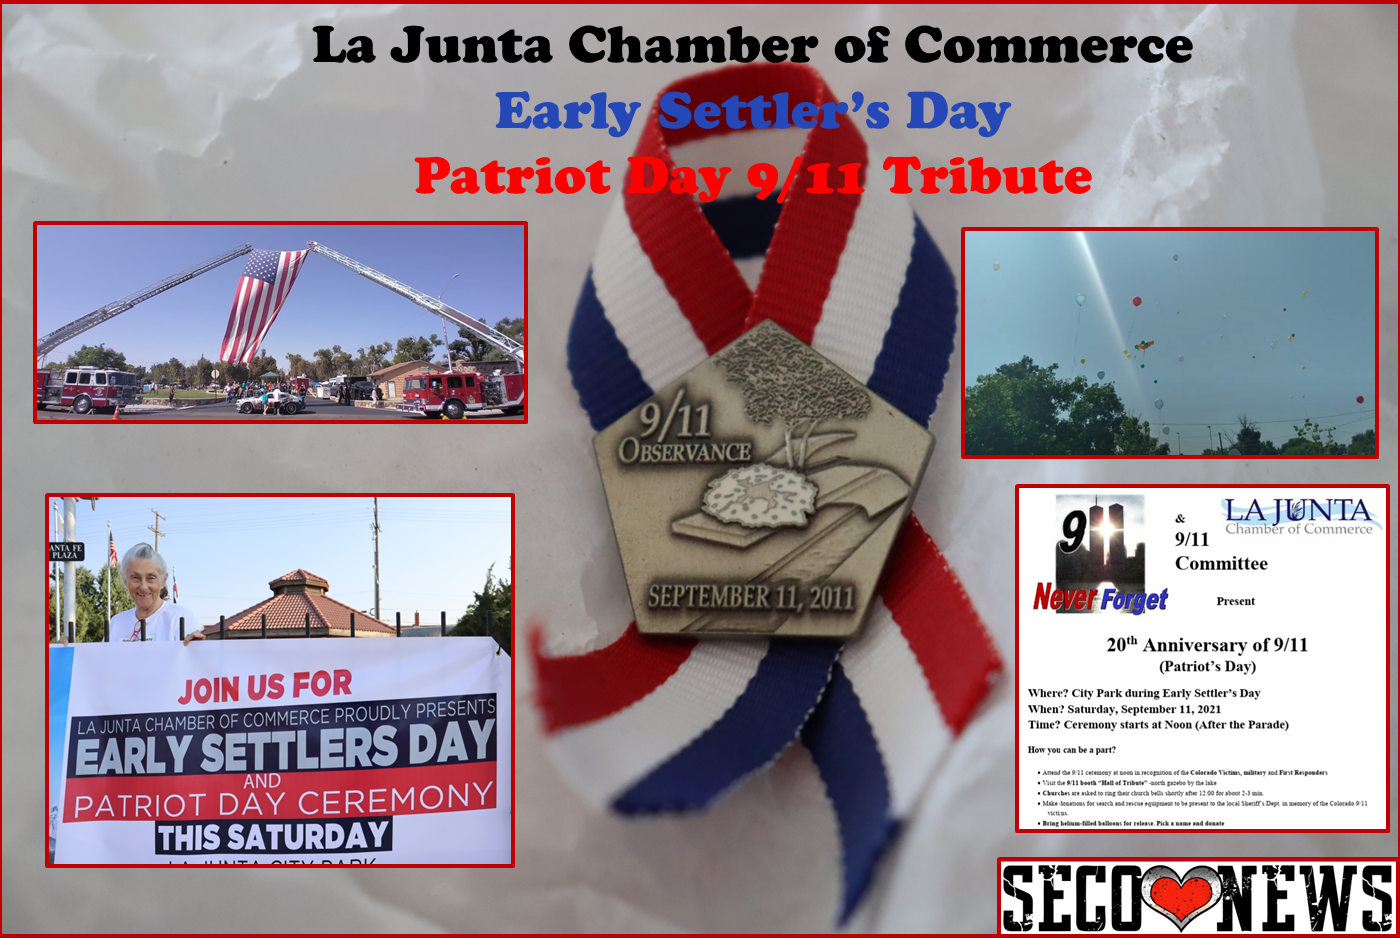 La Junta Chamber of Commerce Early Settler's Day Patriot Day Ceremony SECO News Cover Image seconews.org